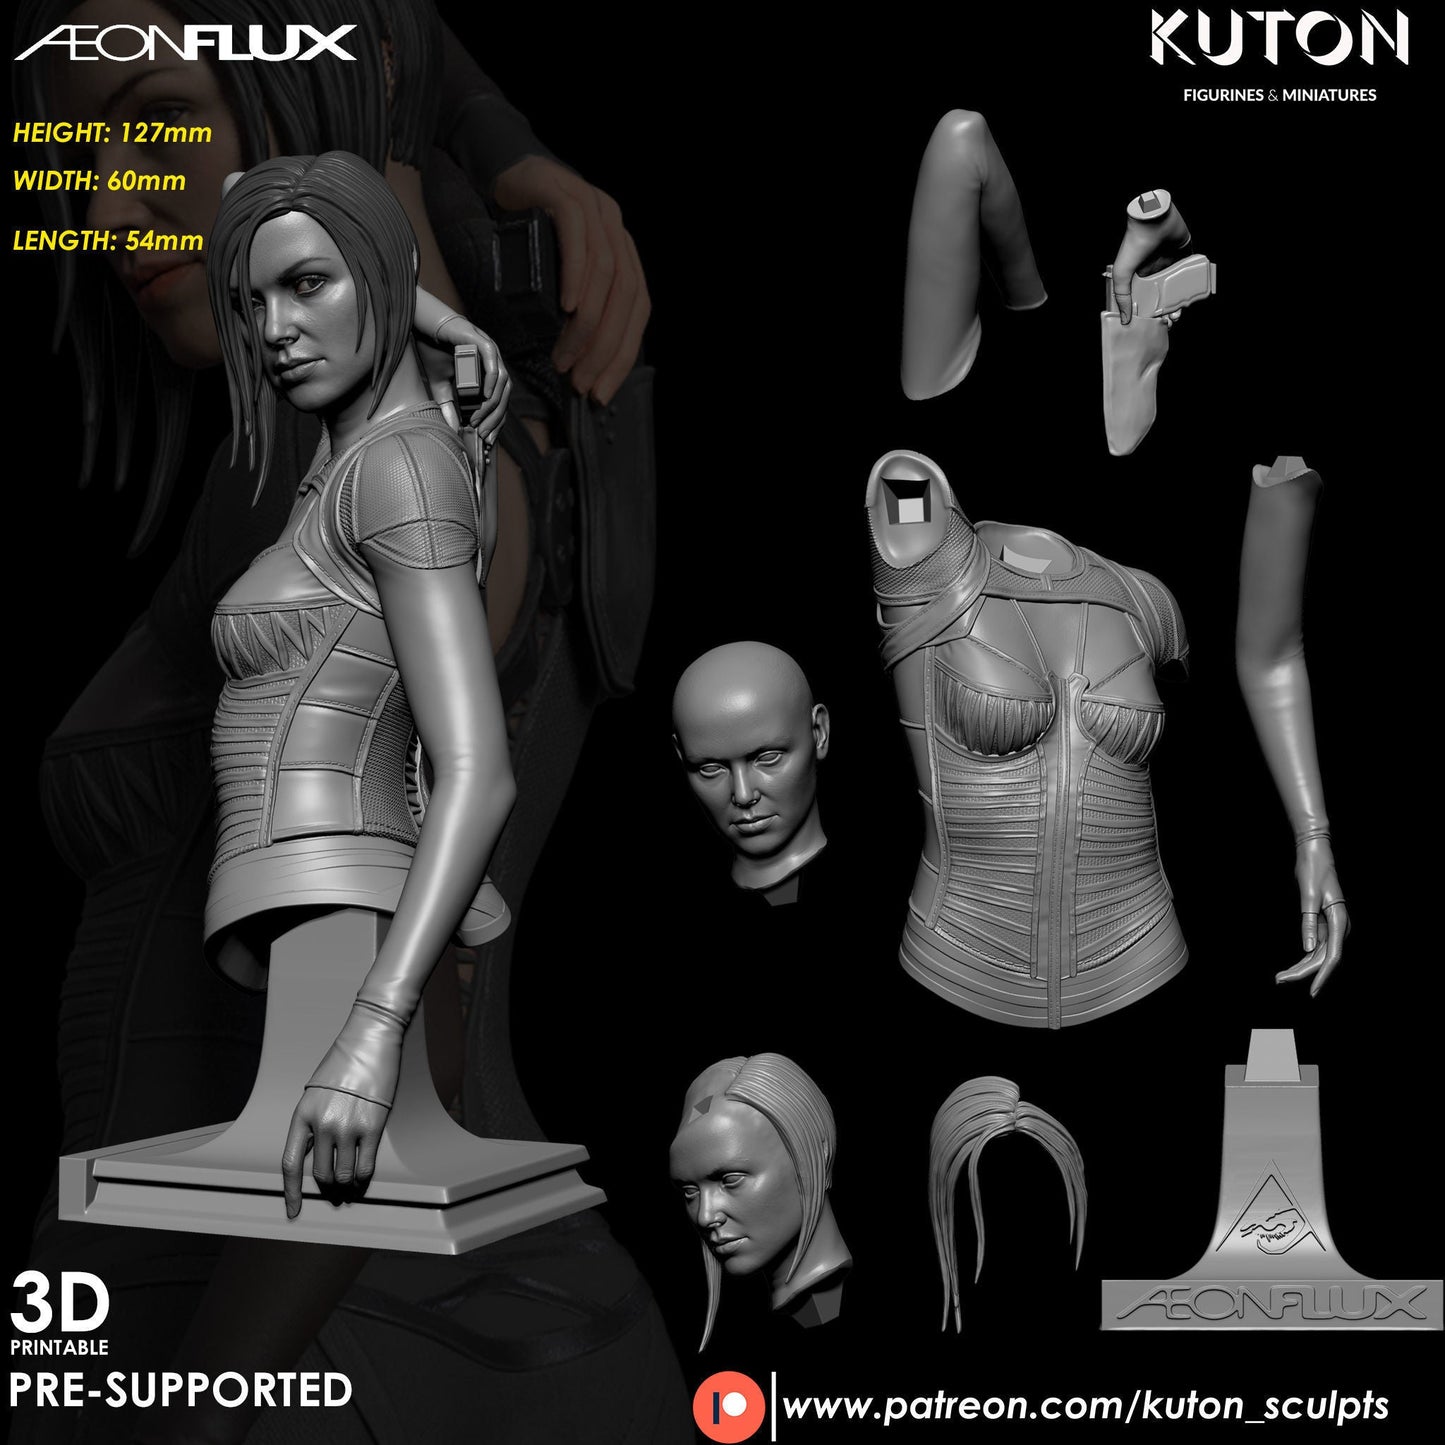 AEon Flux BUST 3d printed Resin Figure Model Kit miniatures figurines collectibles and scale models UNPAINTED Fun Art